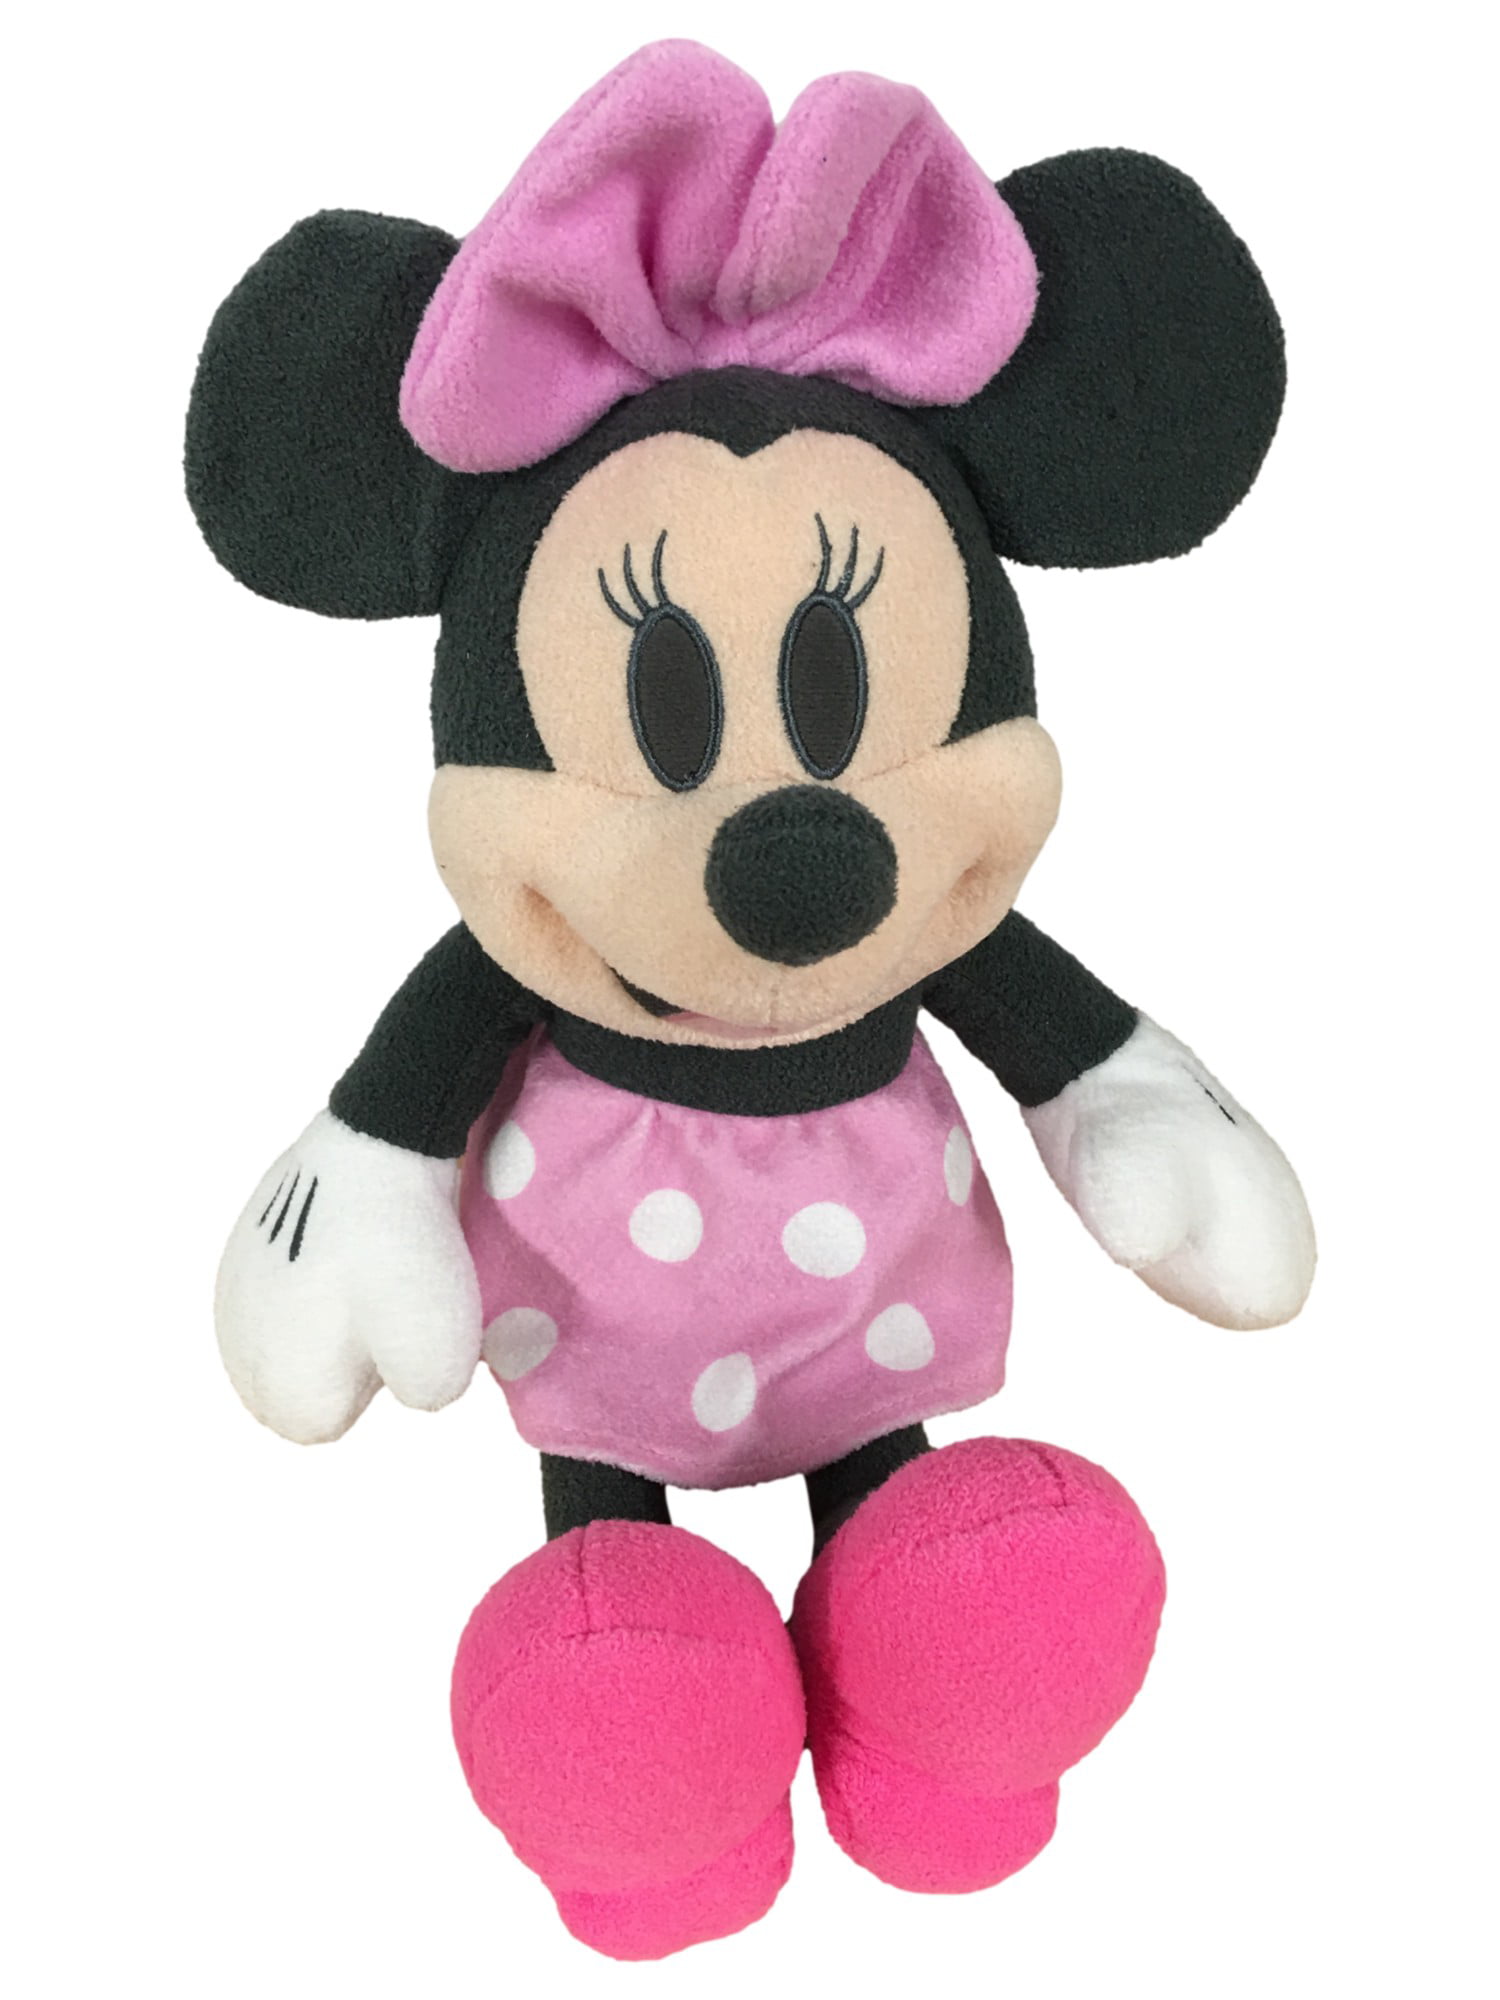 Details about   Disney Baby Minnie Mouse Super Soft NEW FREE SHIPPING! Pink Pastel Plush 